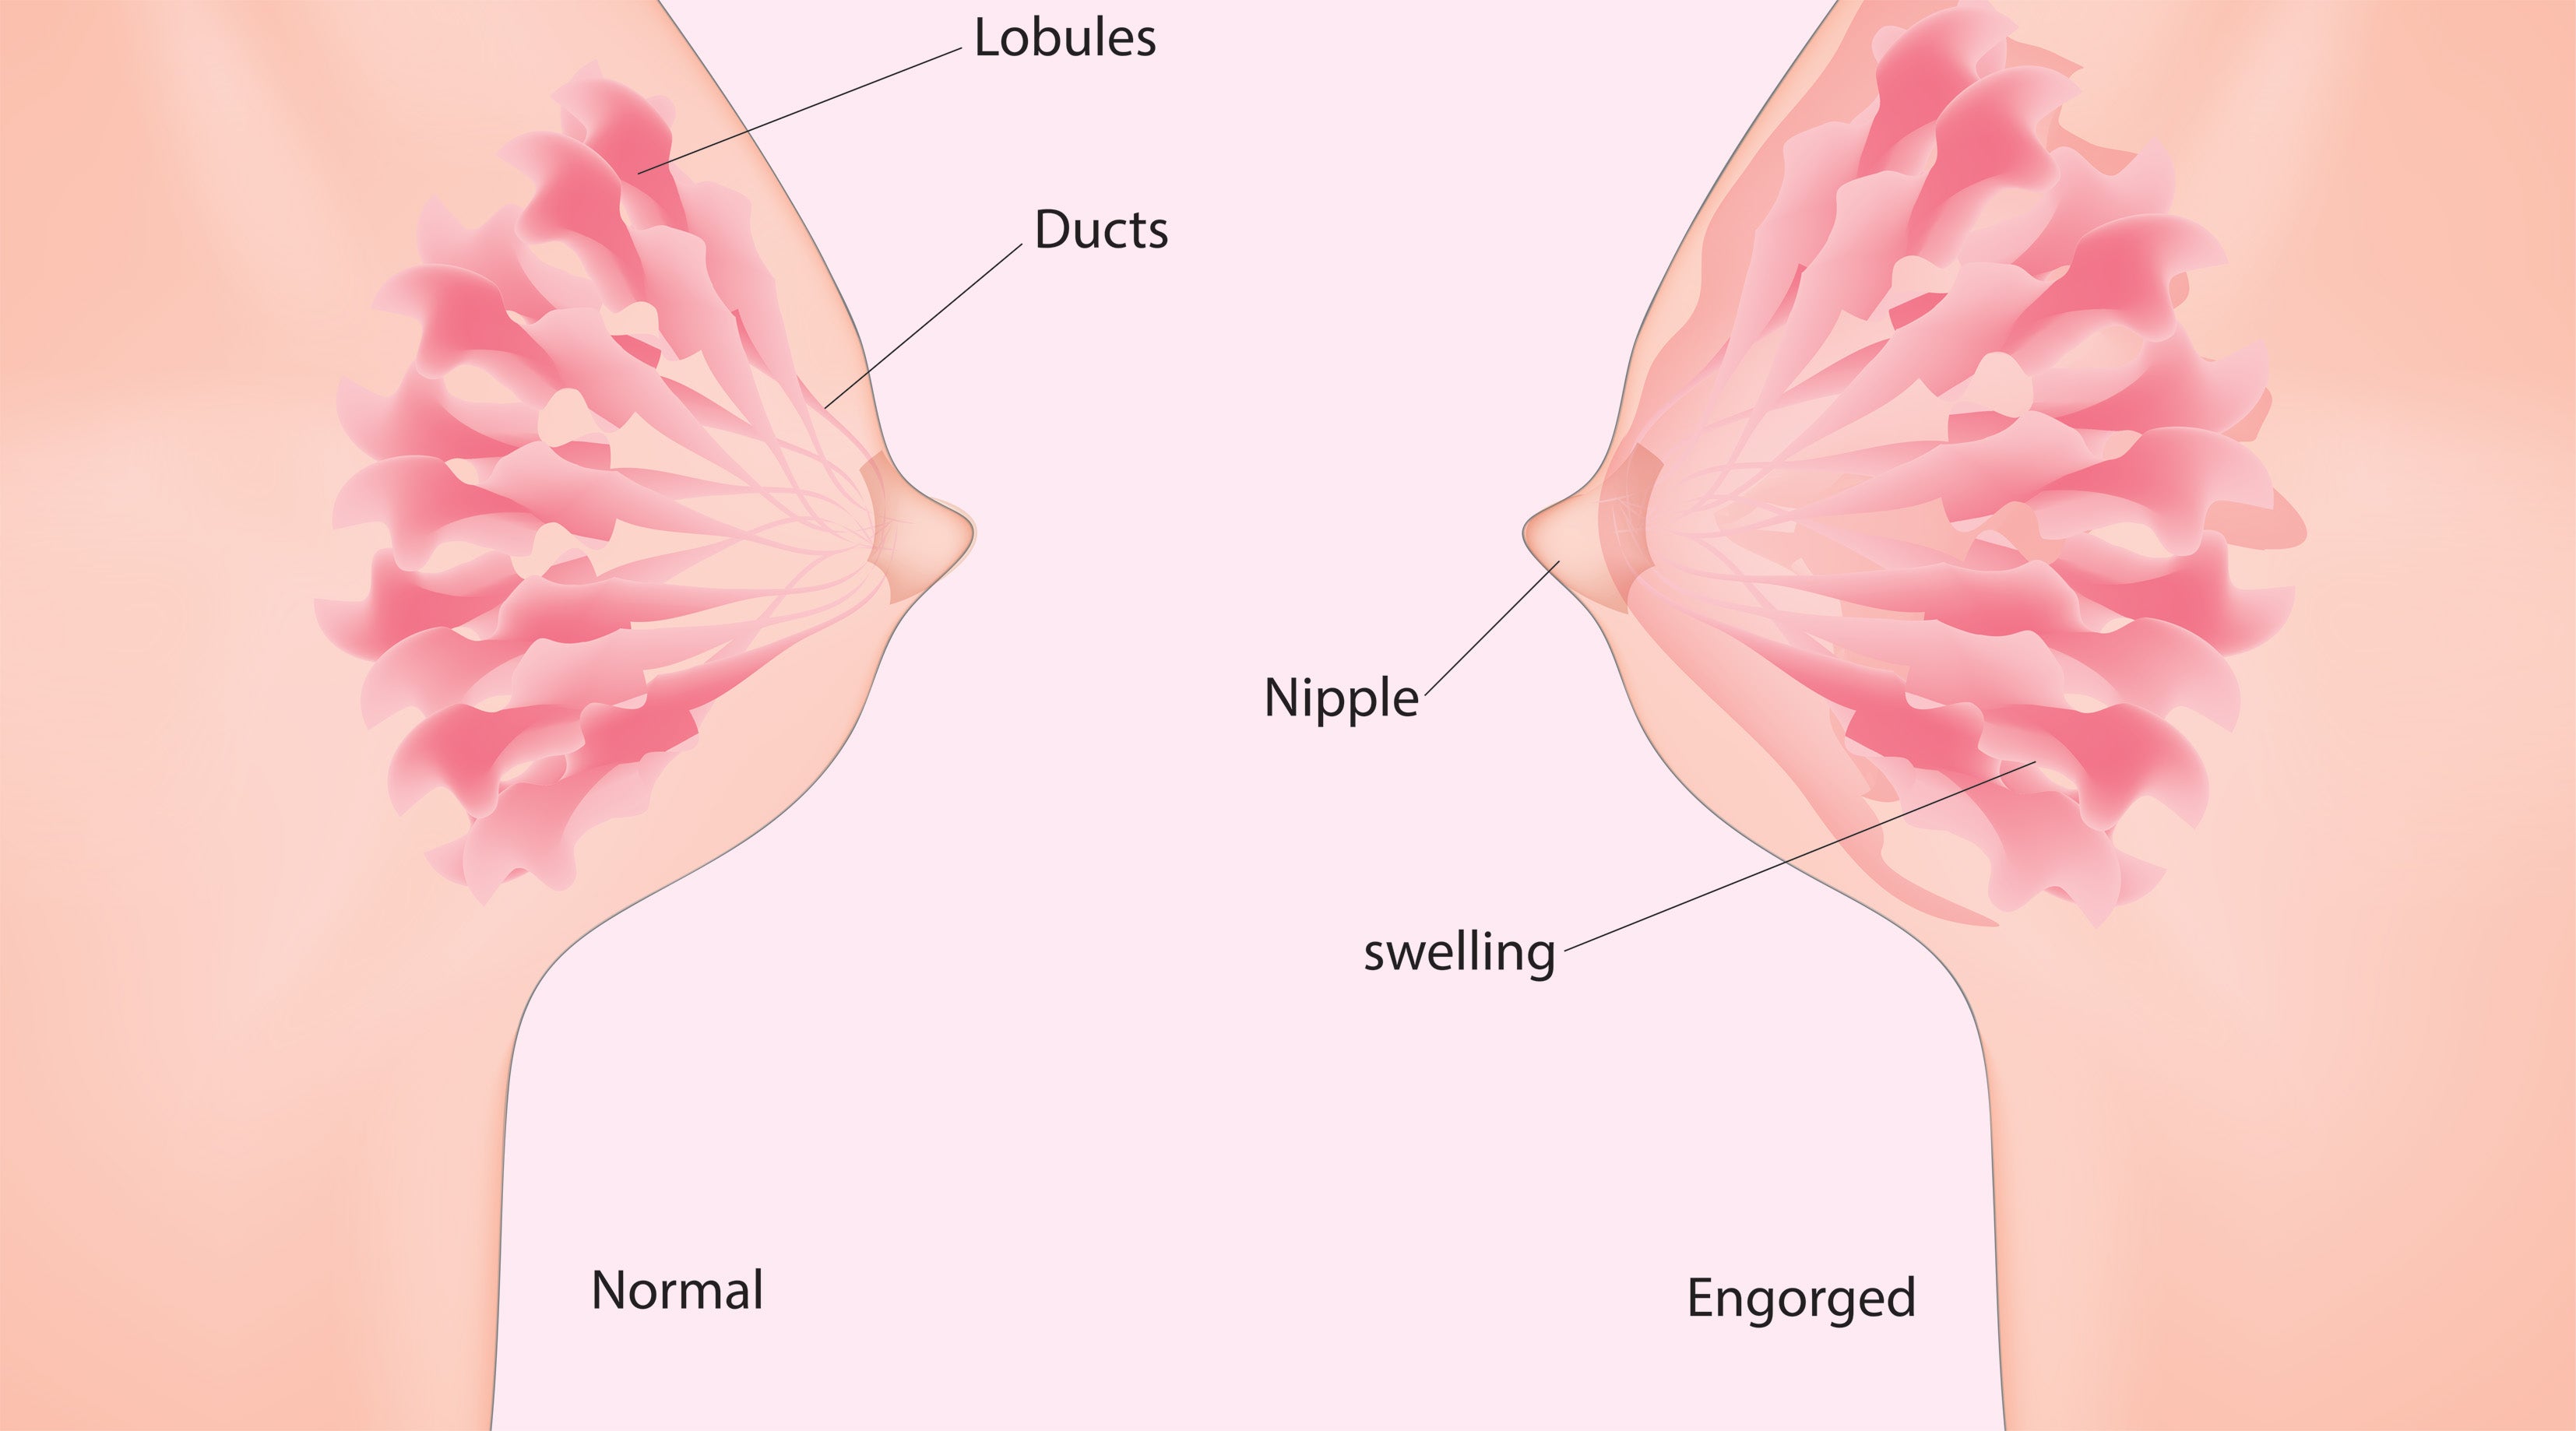 How to Make a Warm Compress for Breast Engorgement or Pain